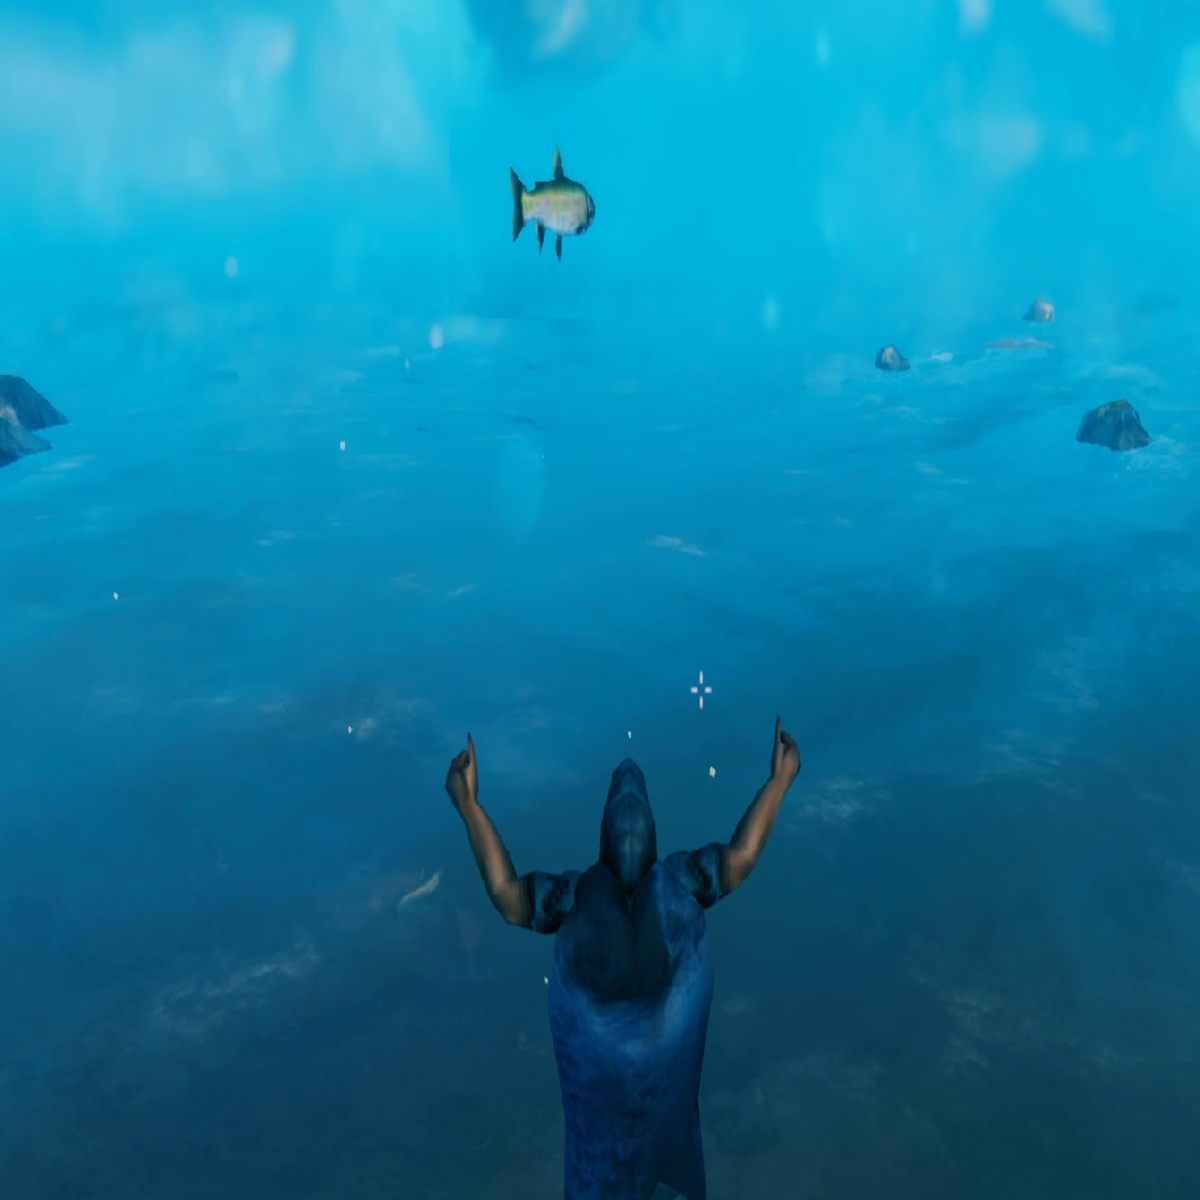 This Valheim mod lets you scream at the ocean to fish